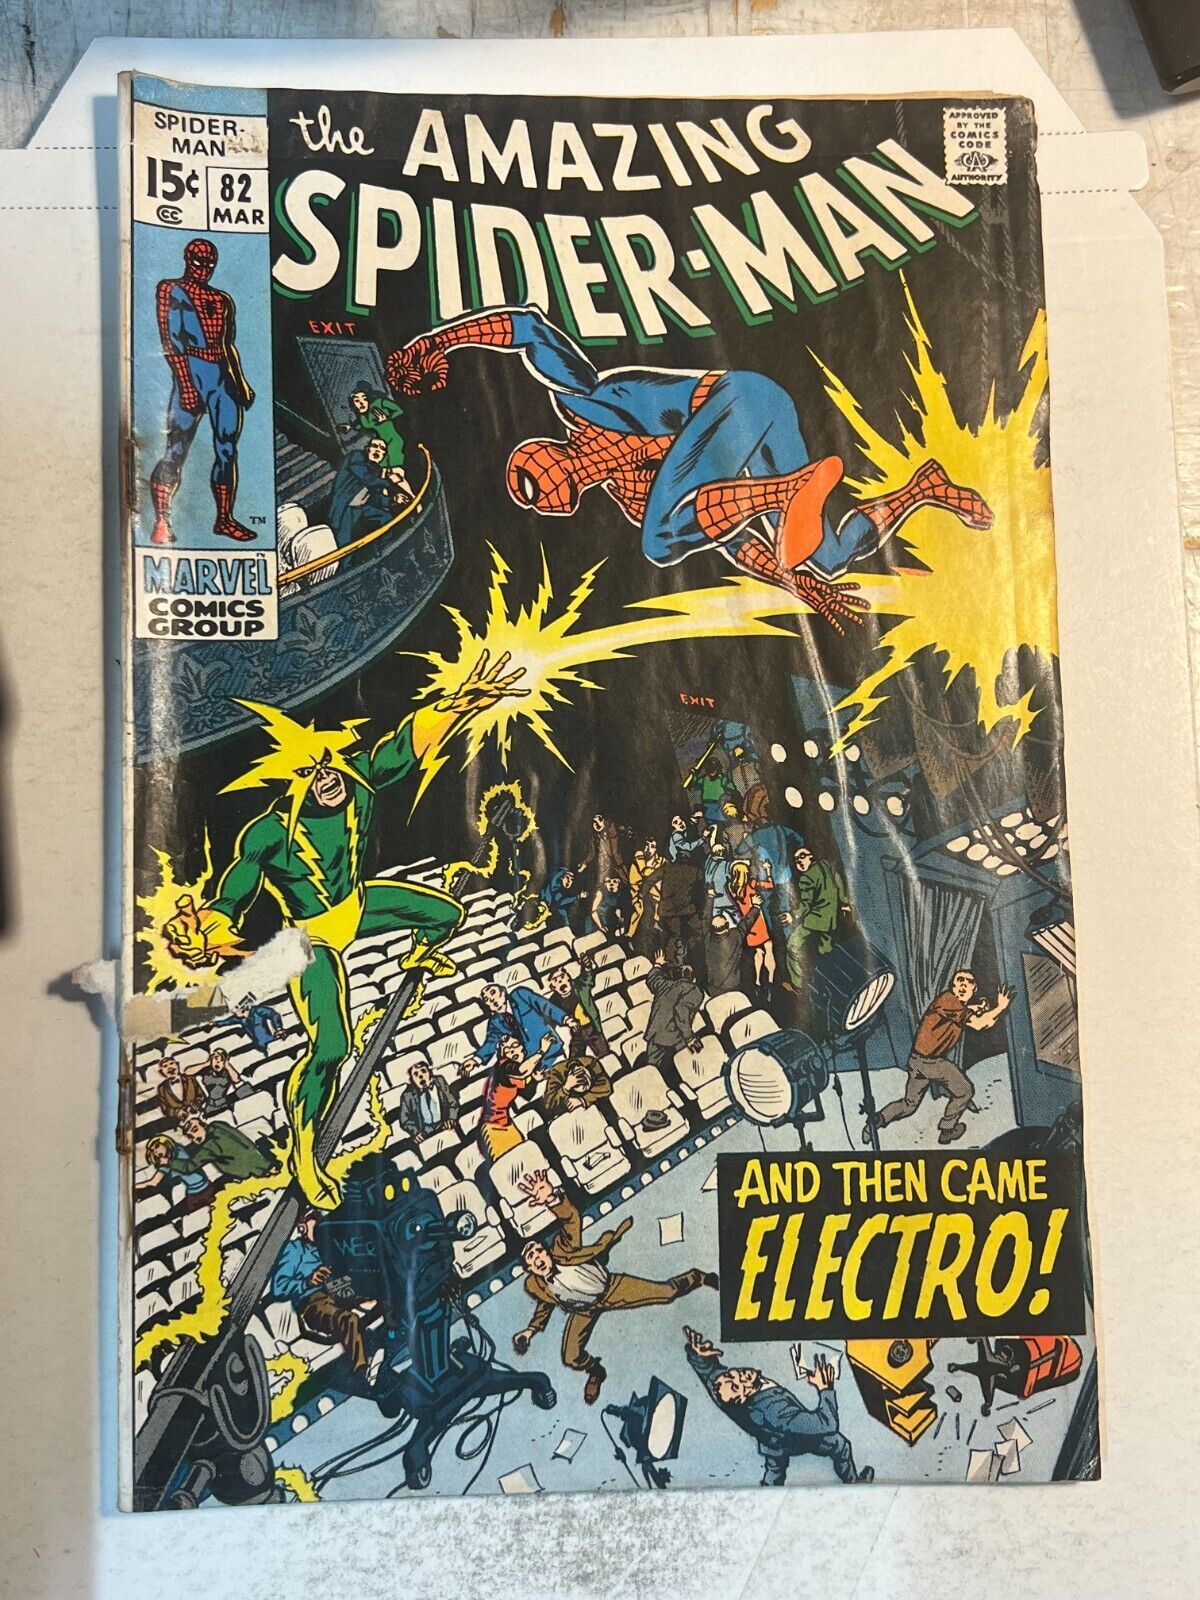 The Amazing Spider-man vol 1 #82 1970 And Then Came Electro | Combined Shipping